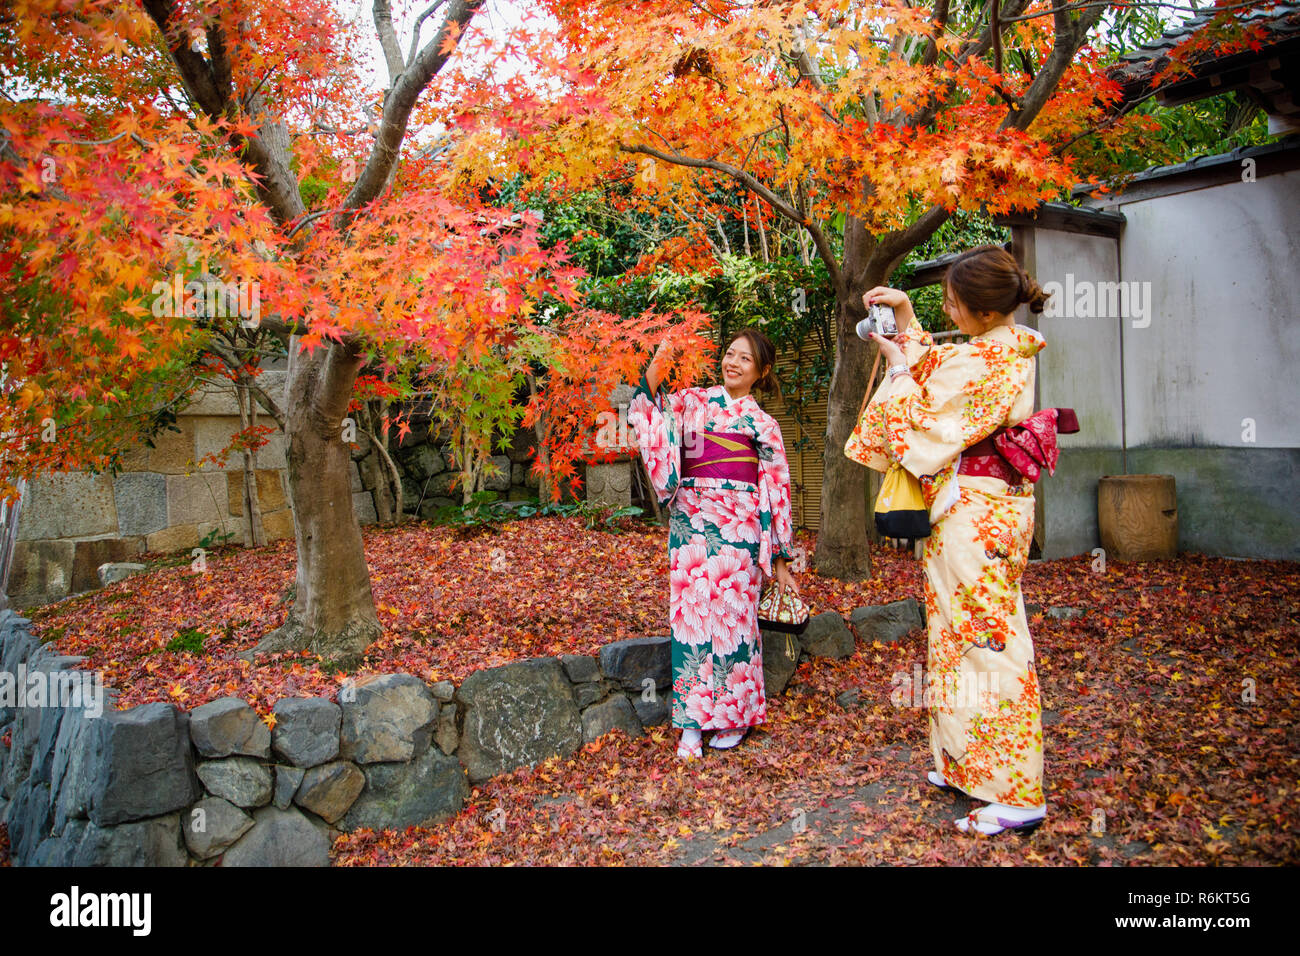 A tourist  wearing a kimono which is one of the traditional style of Japan seen taking pictures next to trees with autumn leaves during fall season in kyoto, japan. Stock Photo